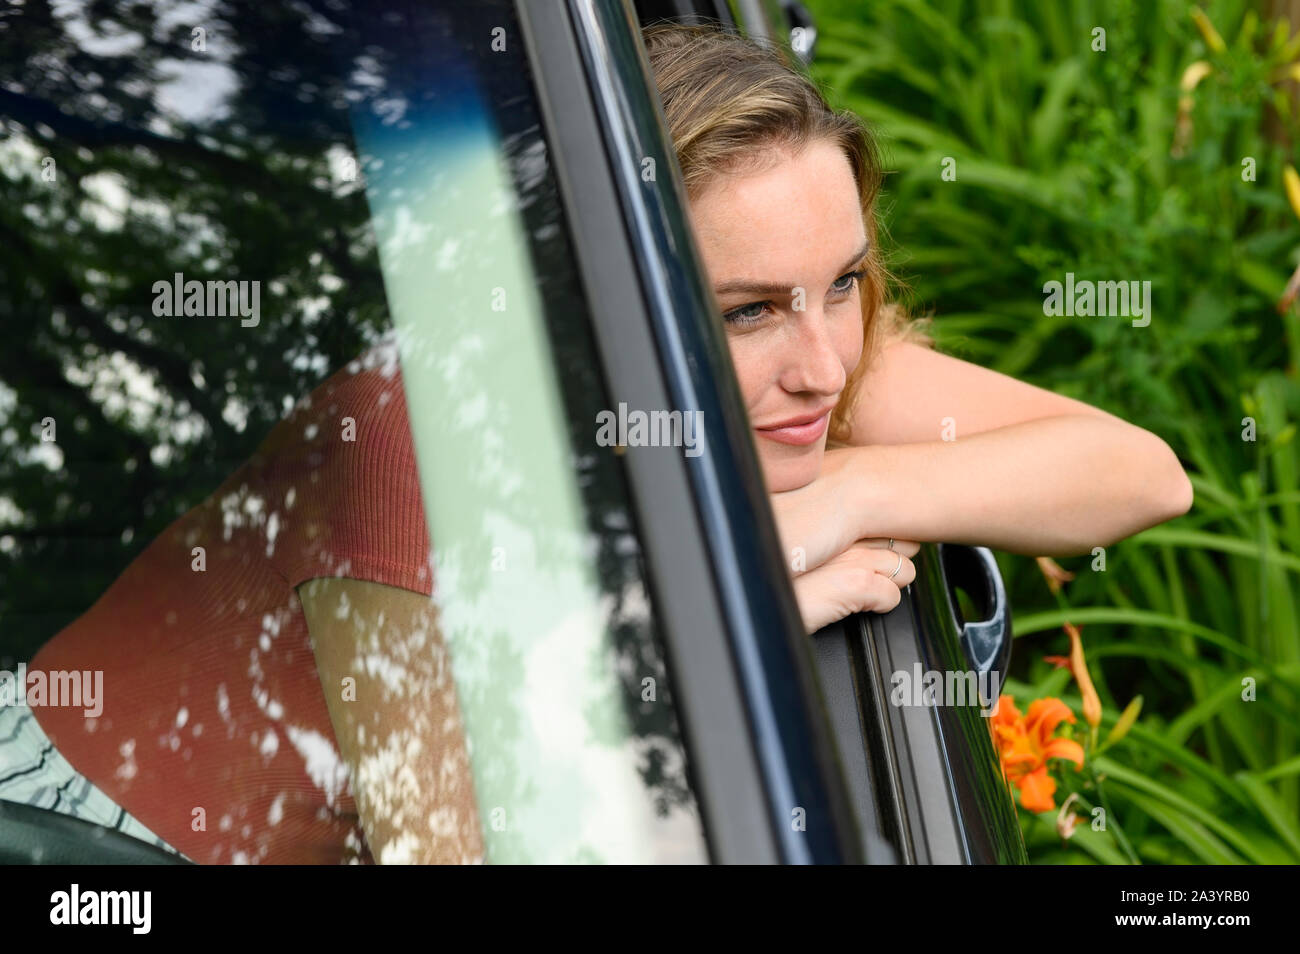 Young woman leaning out of car window Stock Photo